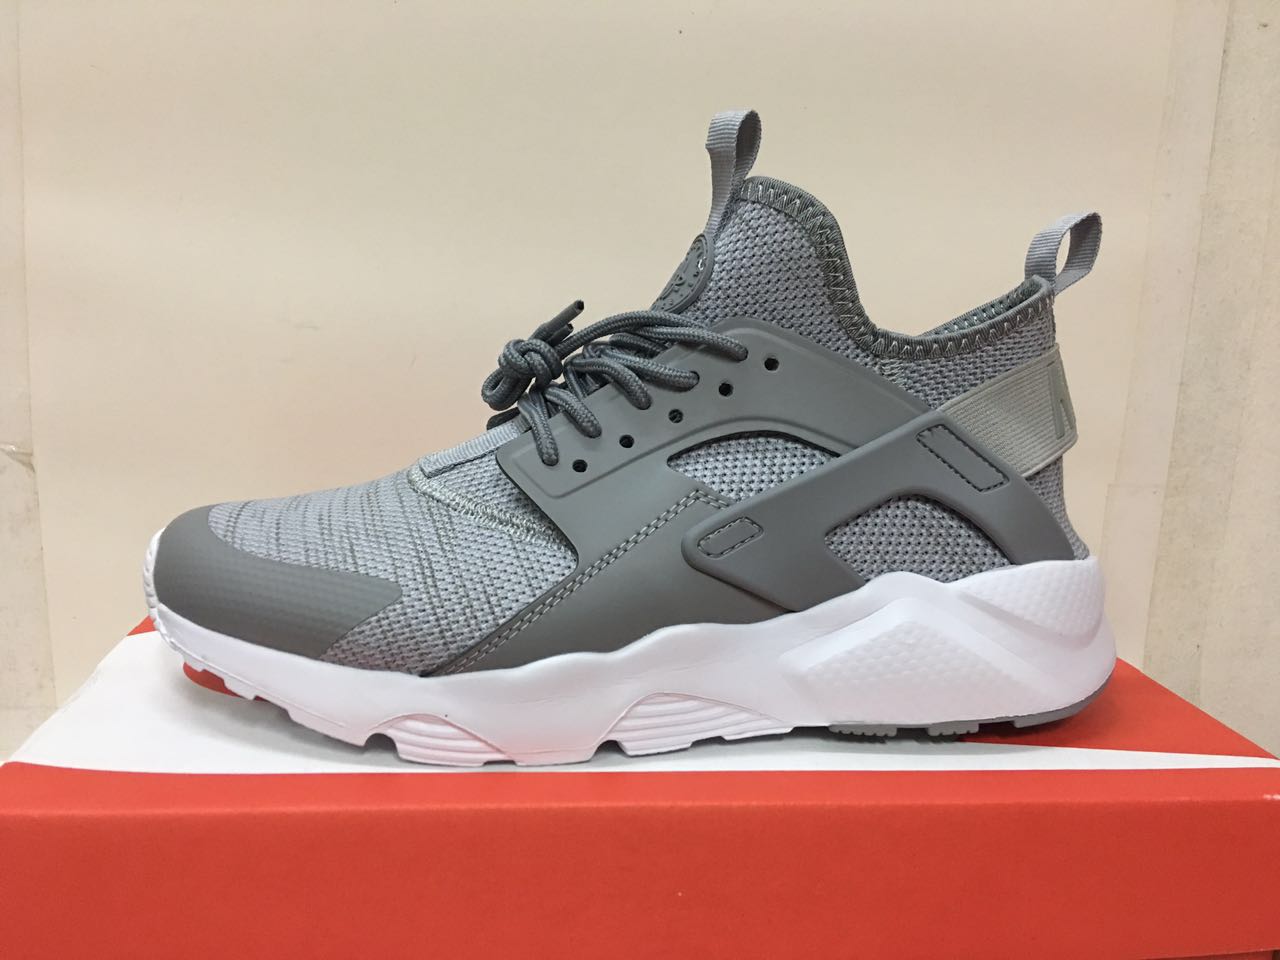 Nike Air Huarache 6 Flyknit Grey White Shoes - Click Image to Close